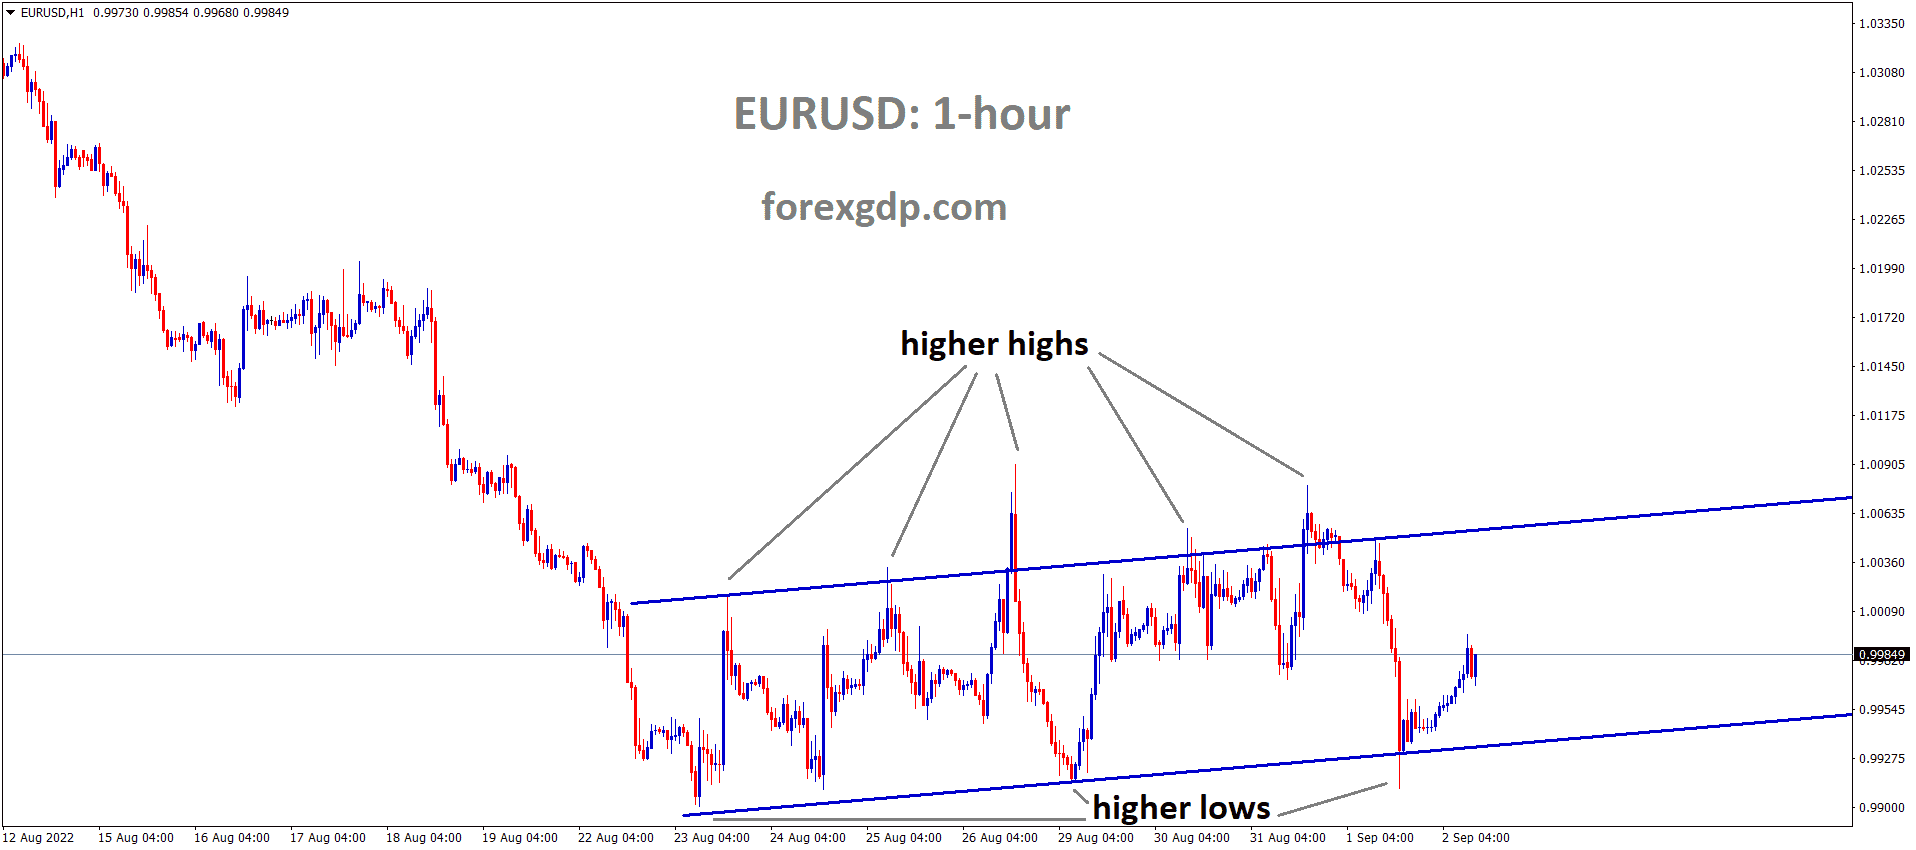 EURUSD is moving in an Ascending channel and the Market has rebounded from the higher low area of the channel